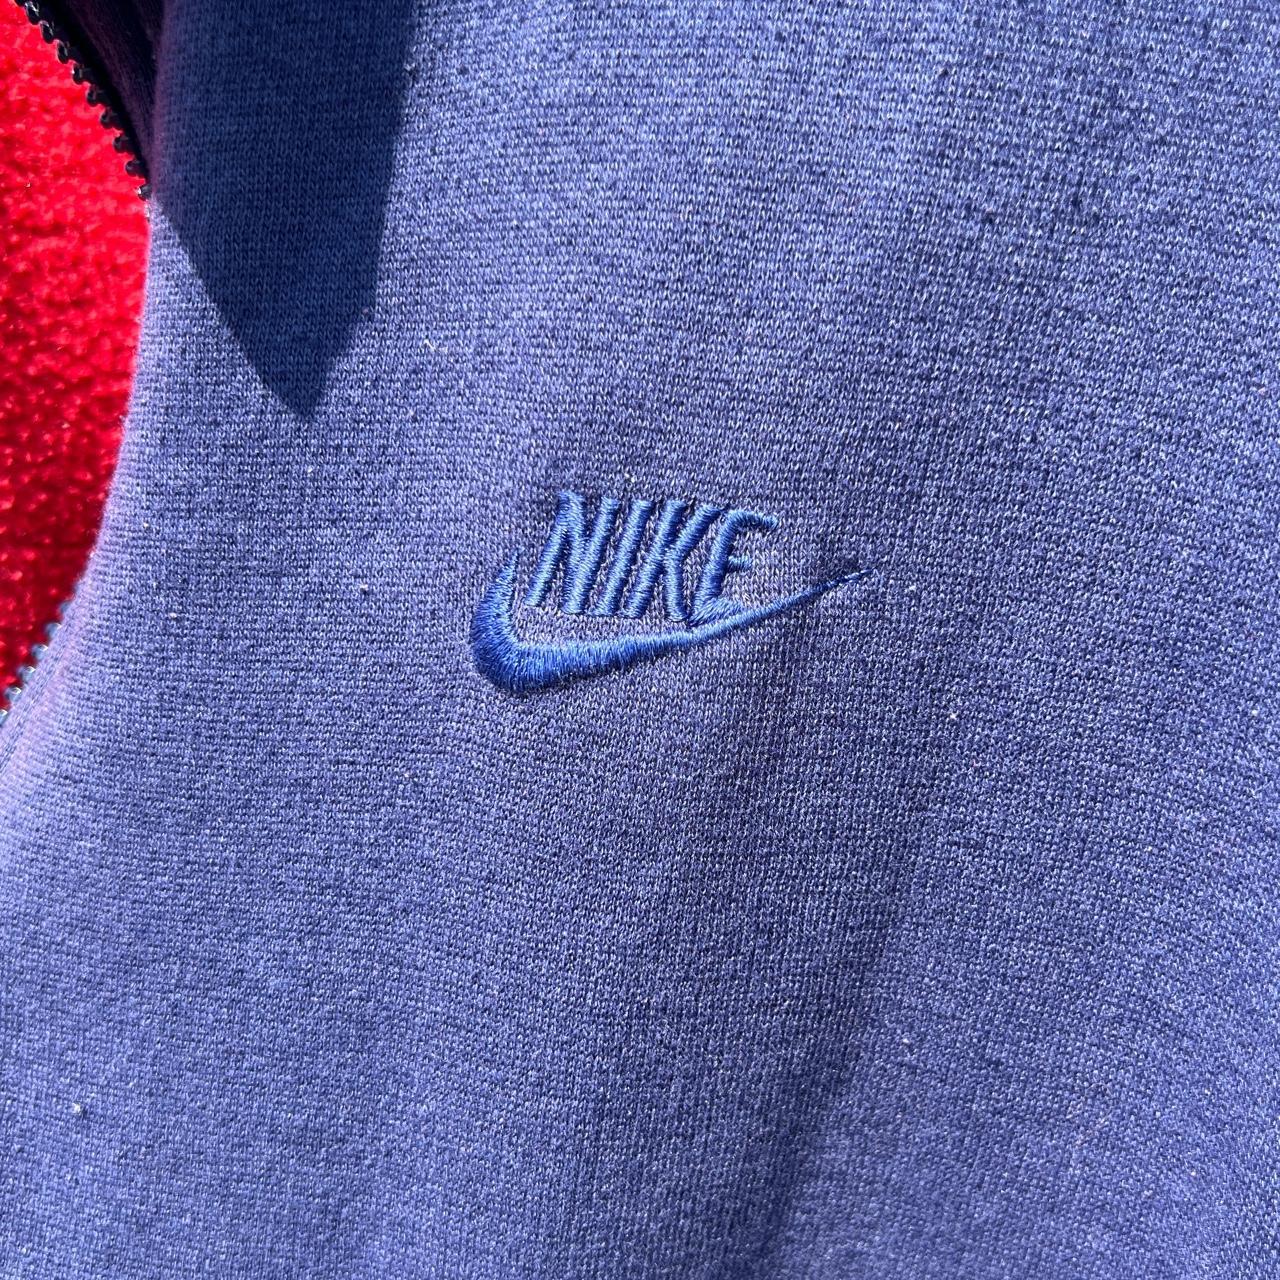 Nike Women's Red and Blue Jacket | Depop